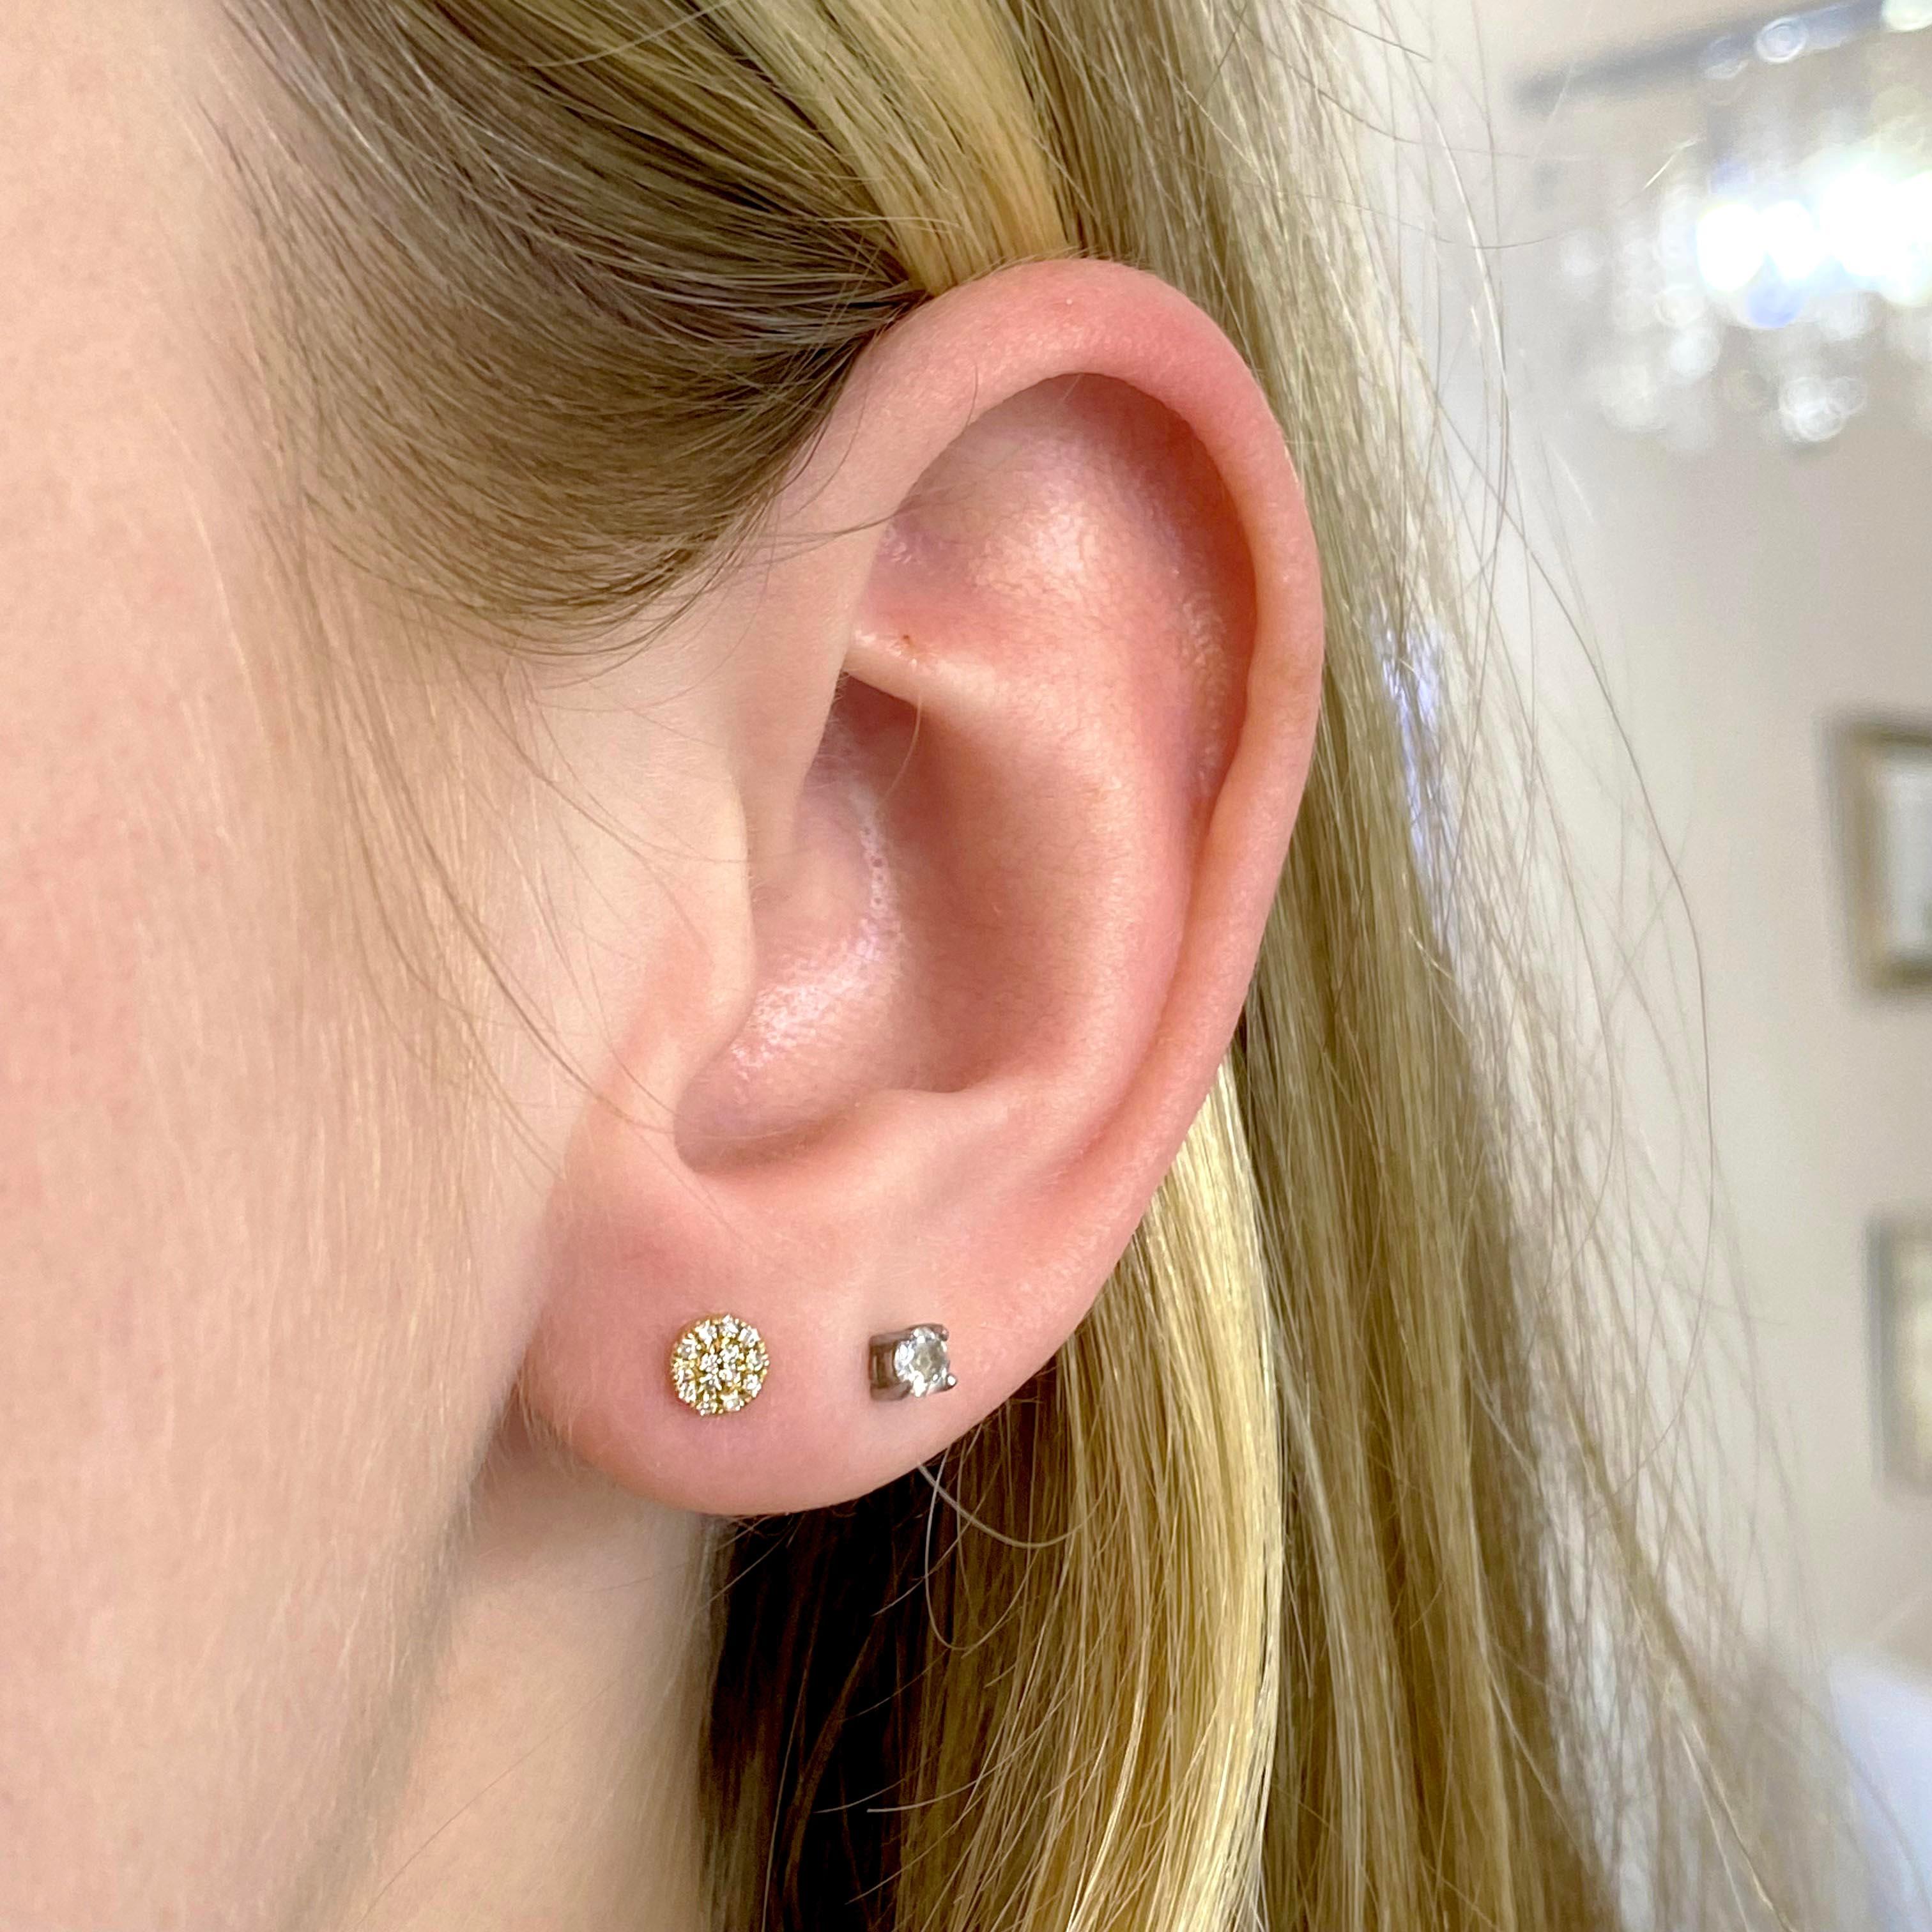 Perfectly petite, these pave diamond studs are great for that low-profile everyday fit and feel. These cuties are covered in little diamonds for a fabulous accent anywhere on your ear. The diamonds are all G-H color and VS clarity, weighing a total